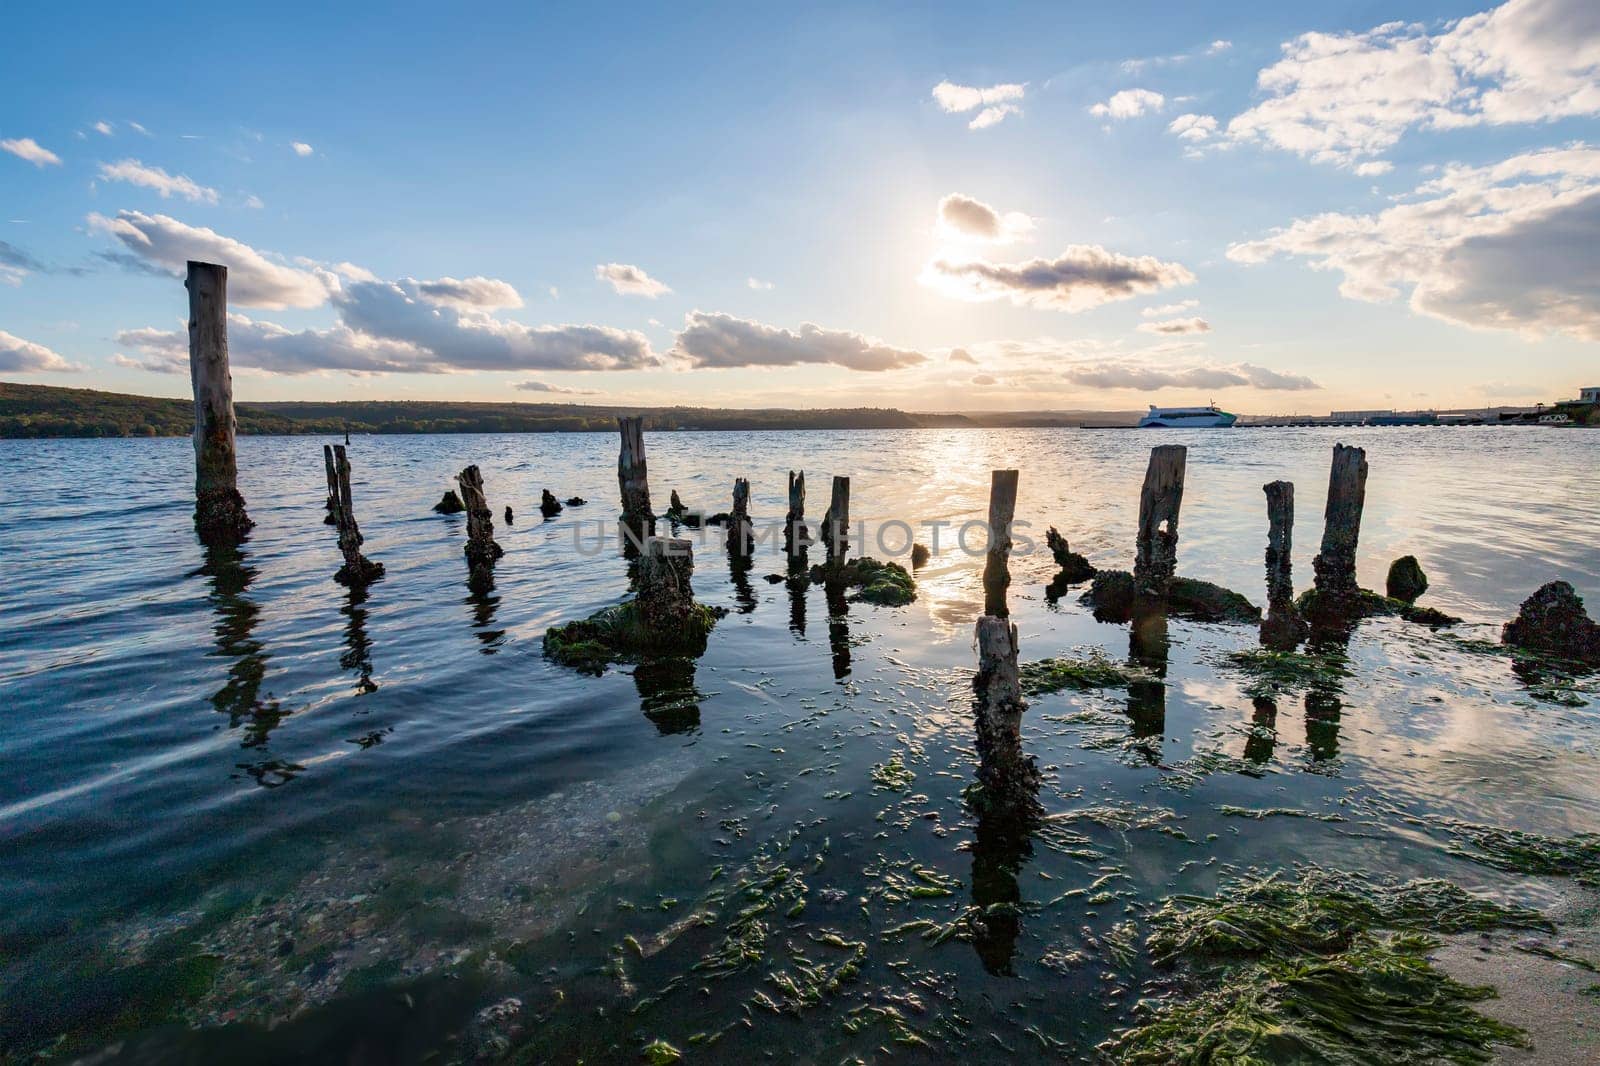 Old timber pillars protruding from the water against the sunset sky